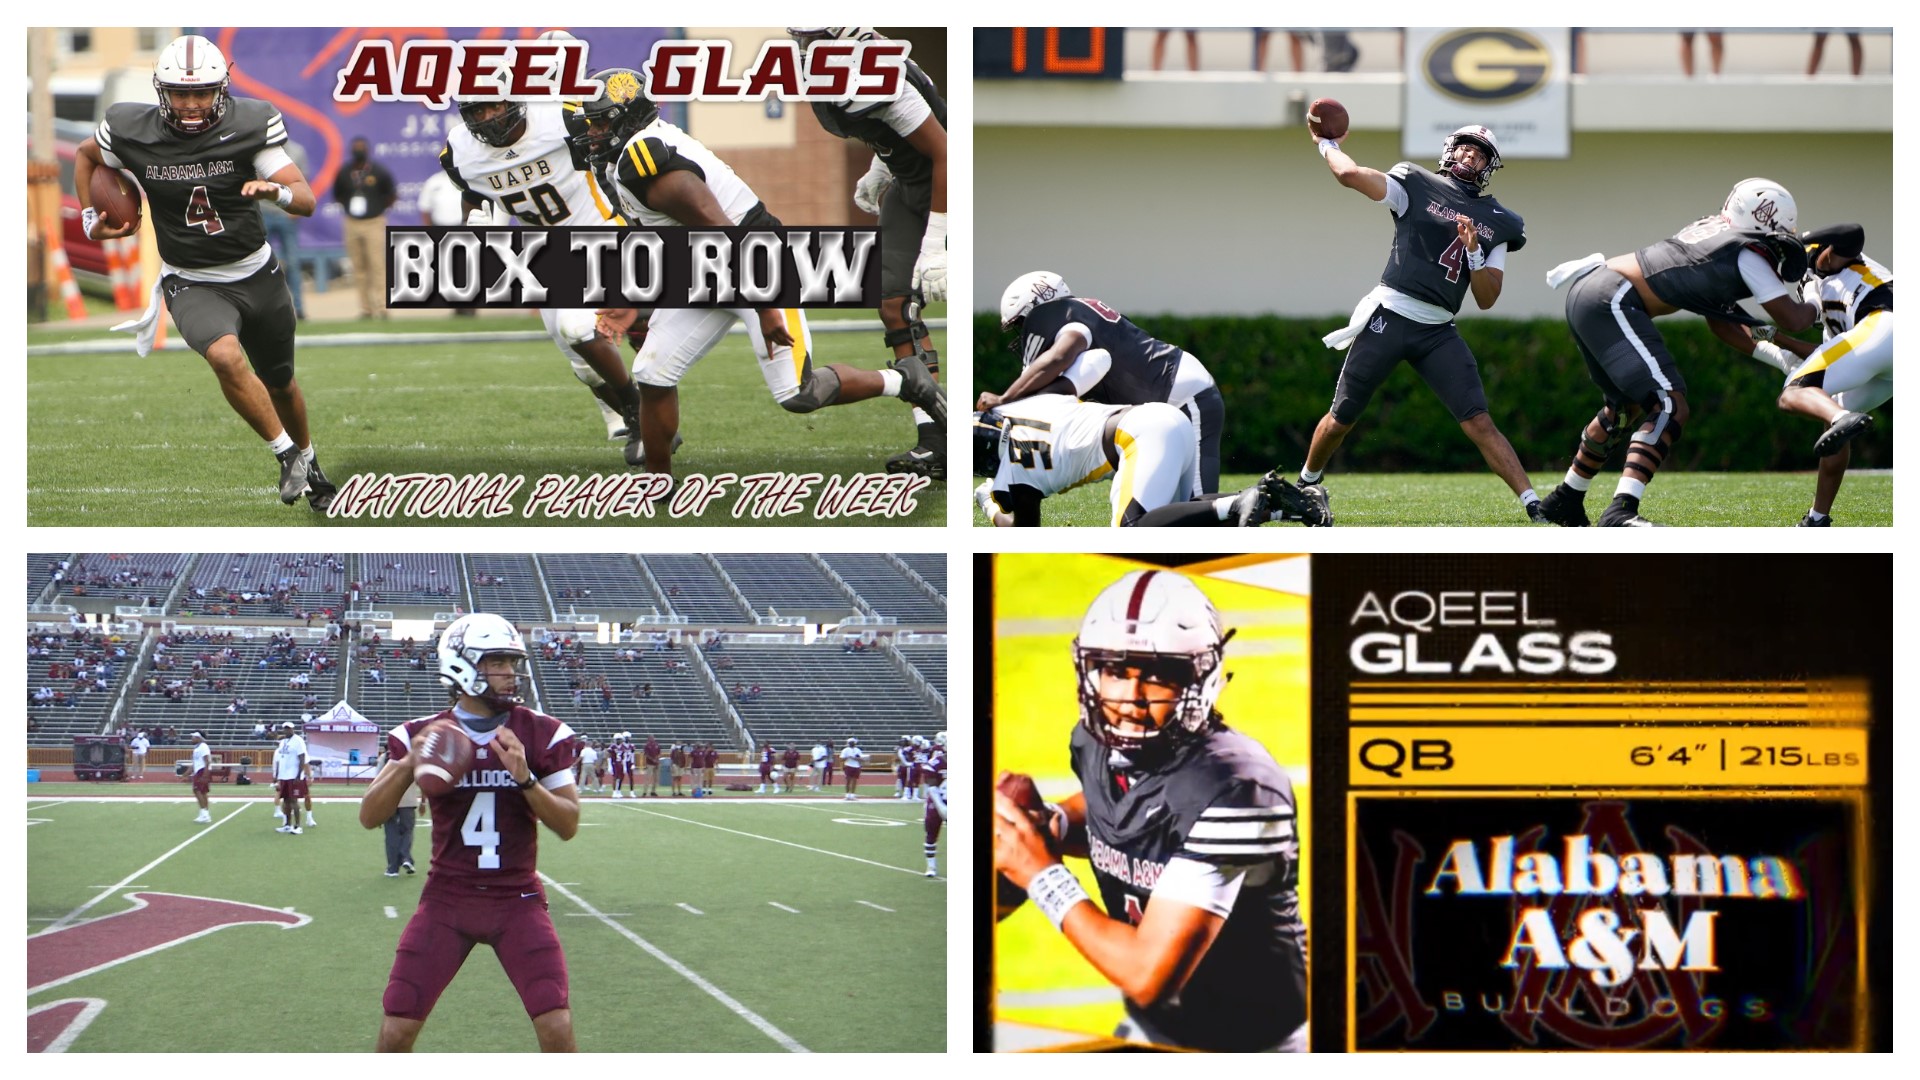 Alabama A&M Sr. QB Aqeel Glass was named the National Player of the Week by BoxToRow & East-West Shrine Bowl.